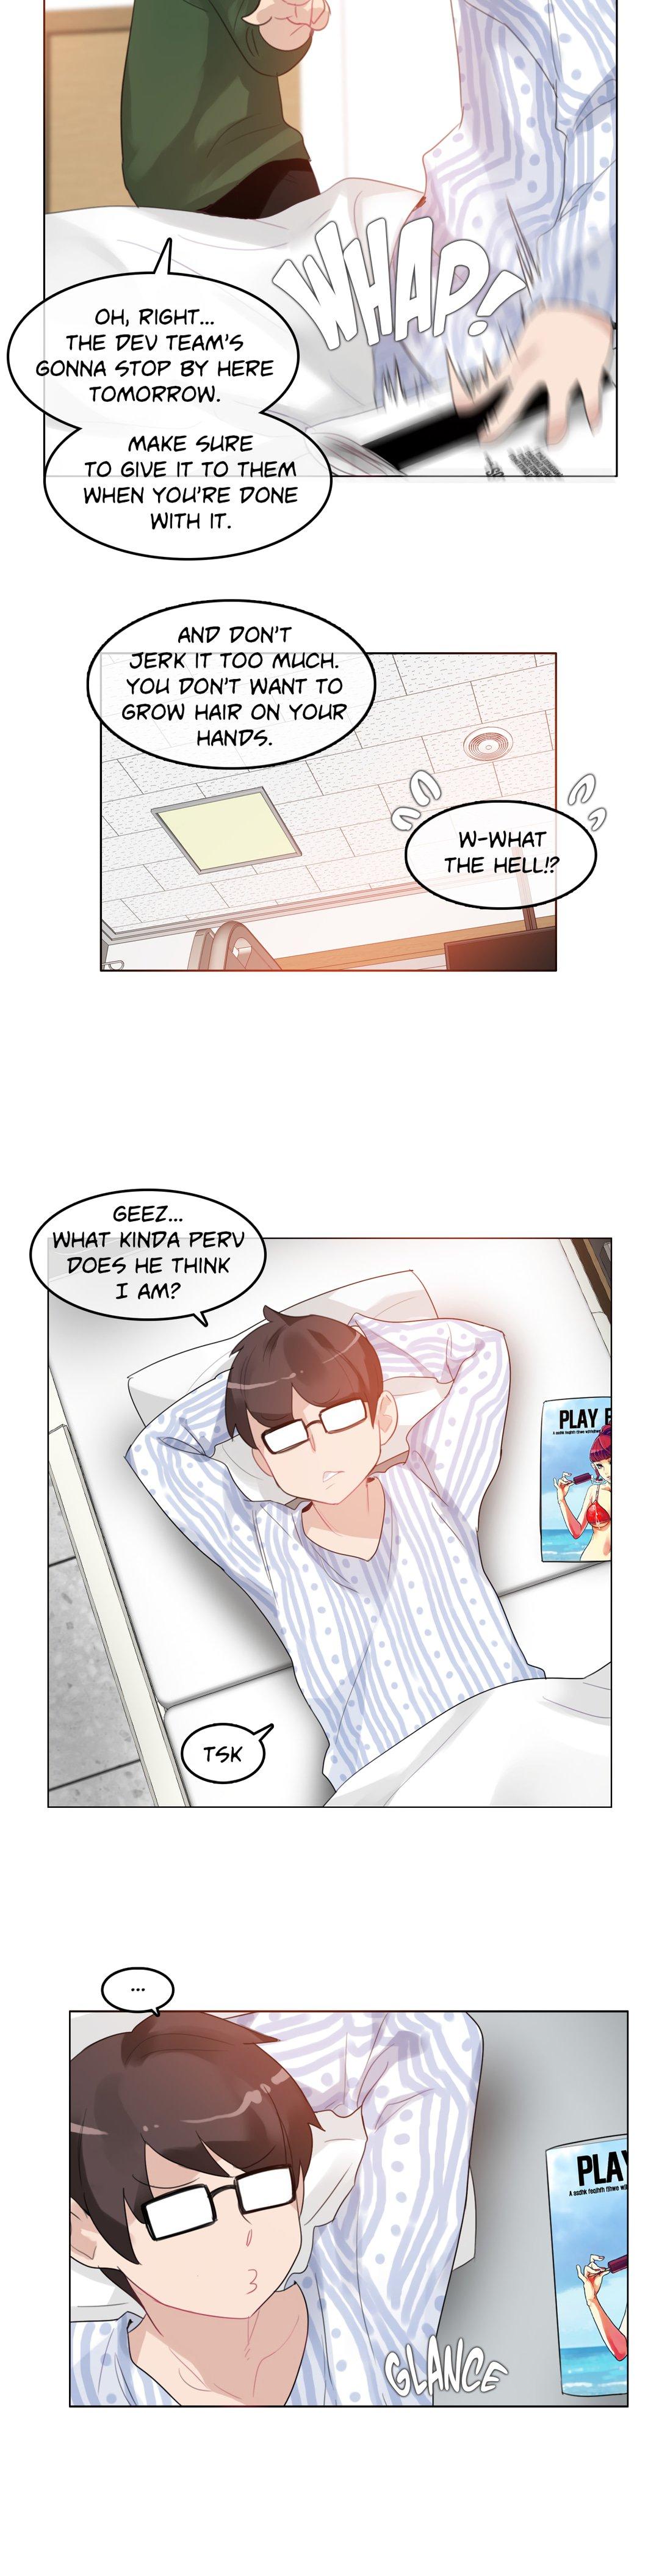 A Pervert's Daily Life • Chapter 46-50 44